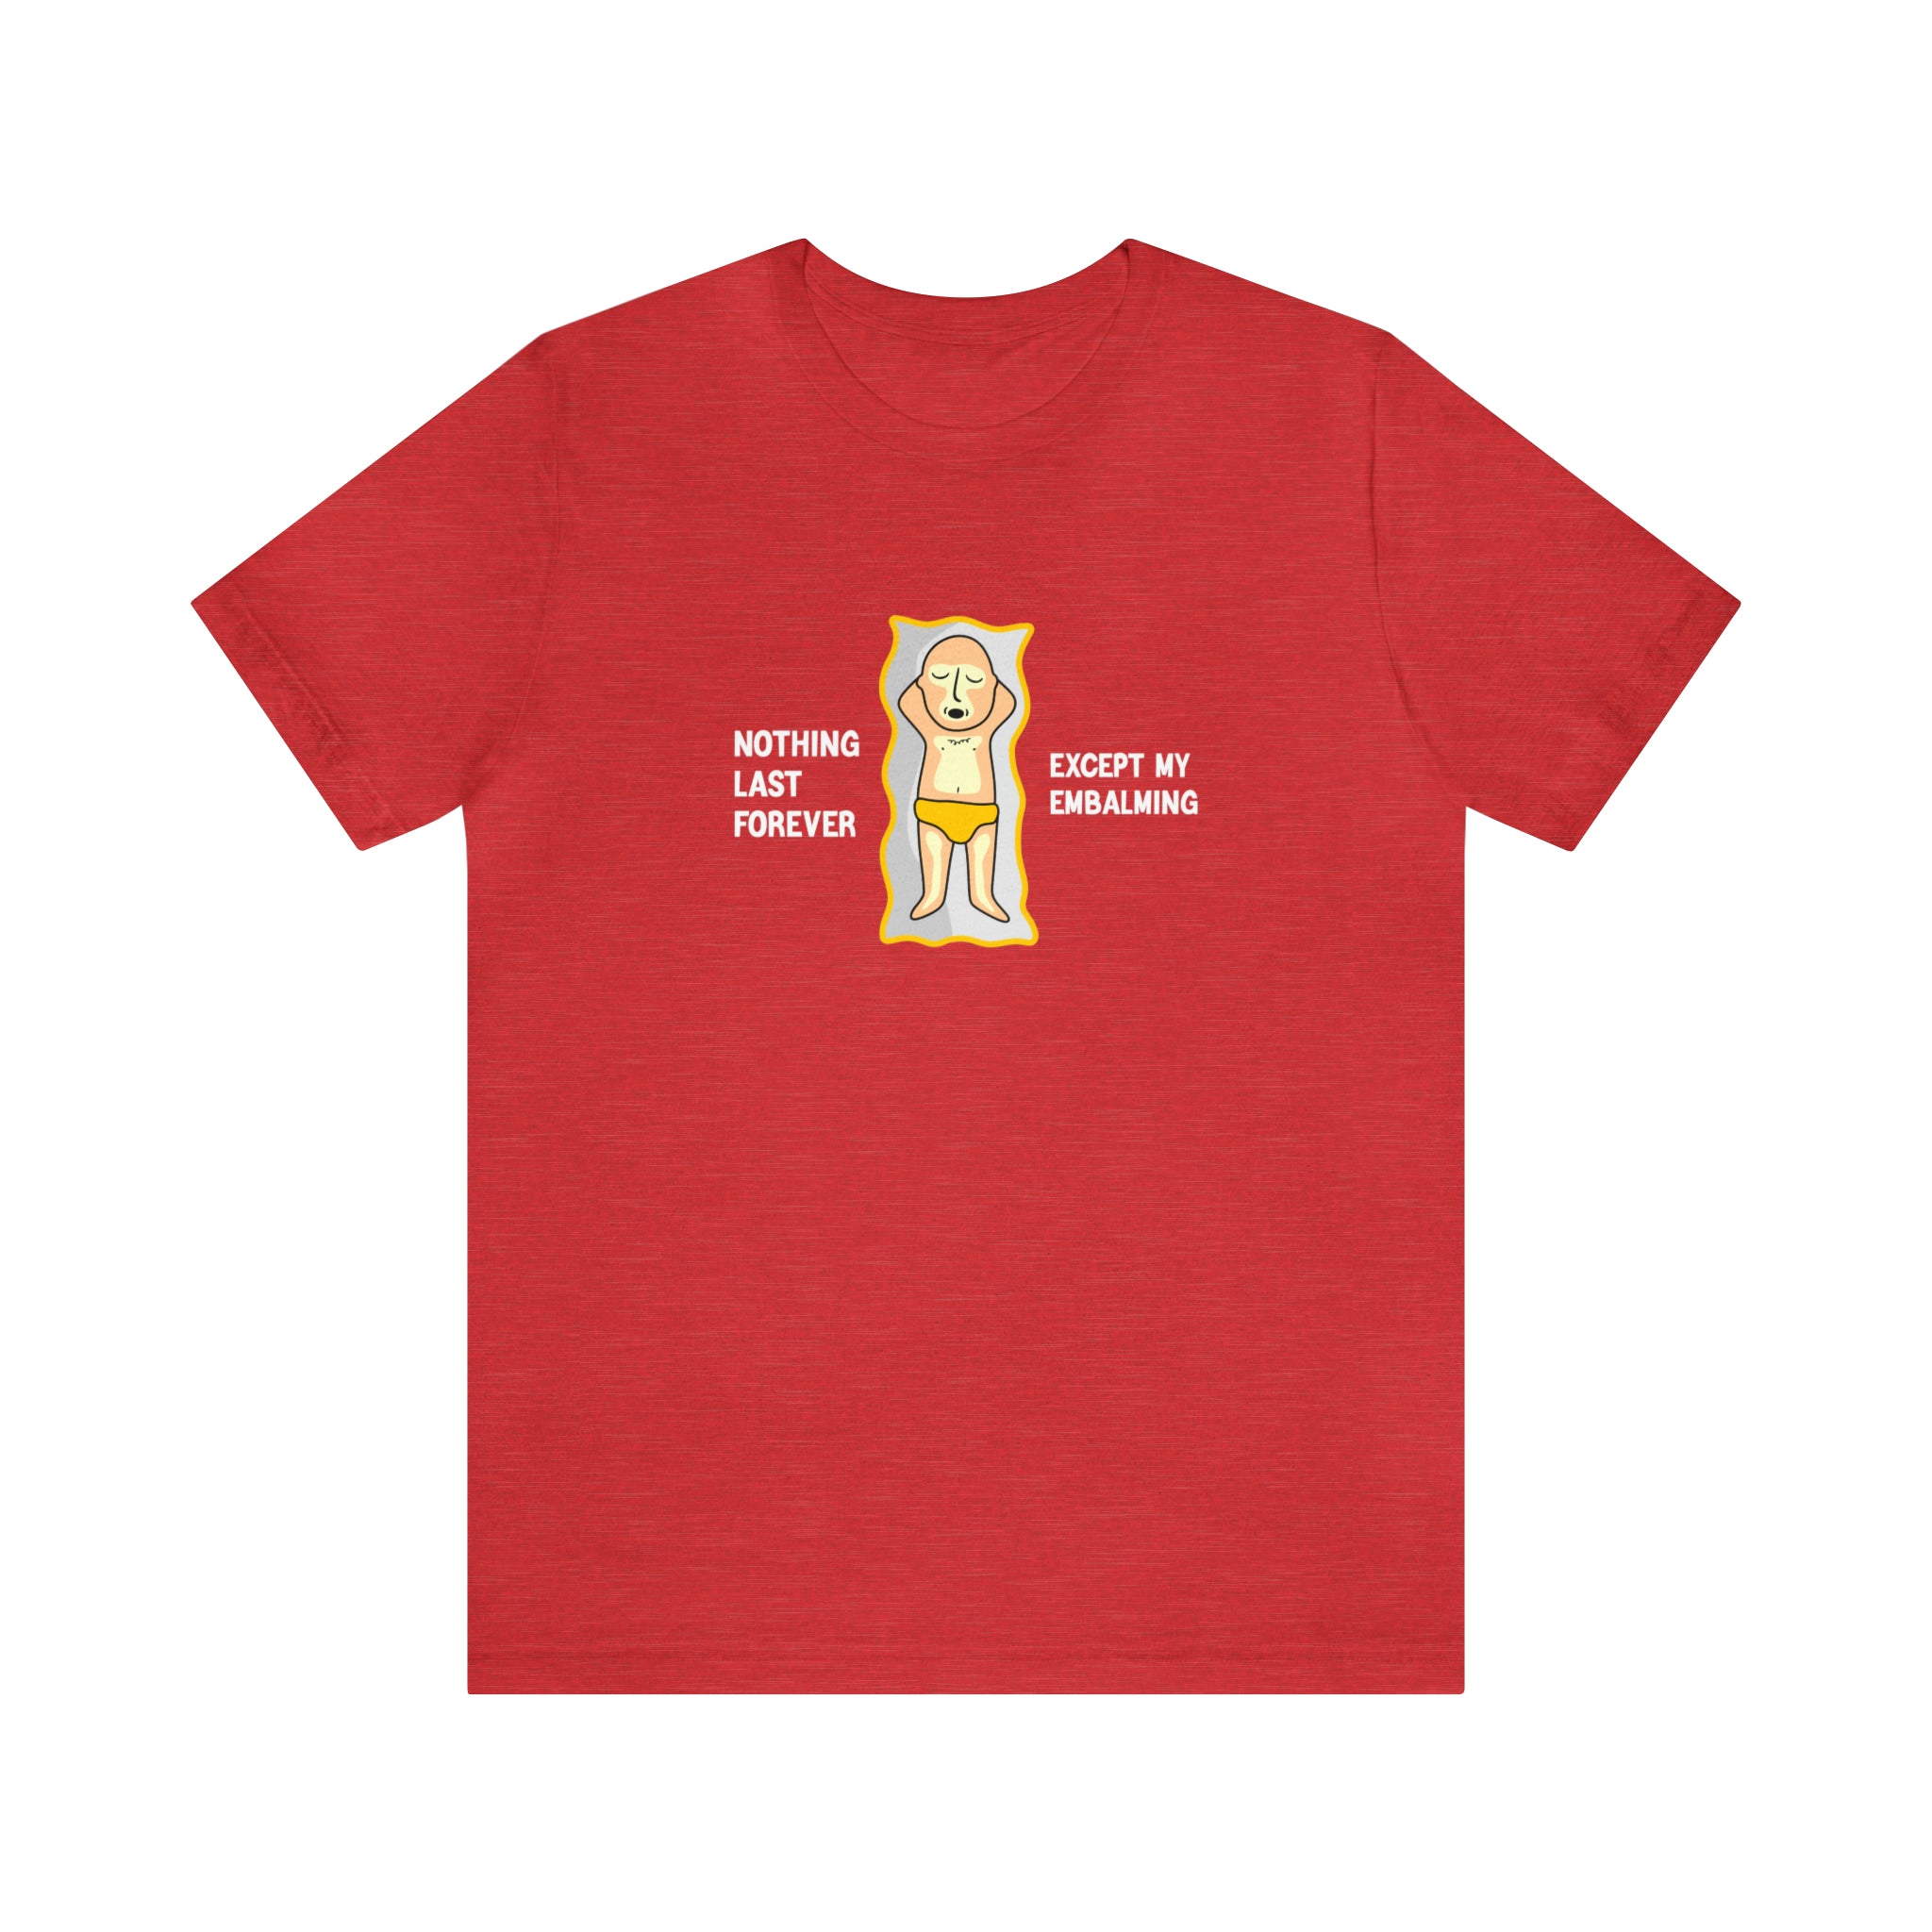 A red Nothing Last Forever Except My Embalming T-Shirt adorned with an image of a man in a red shirt, showcasing his afterlife aspirations.